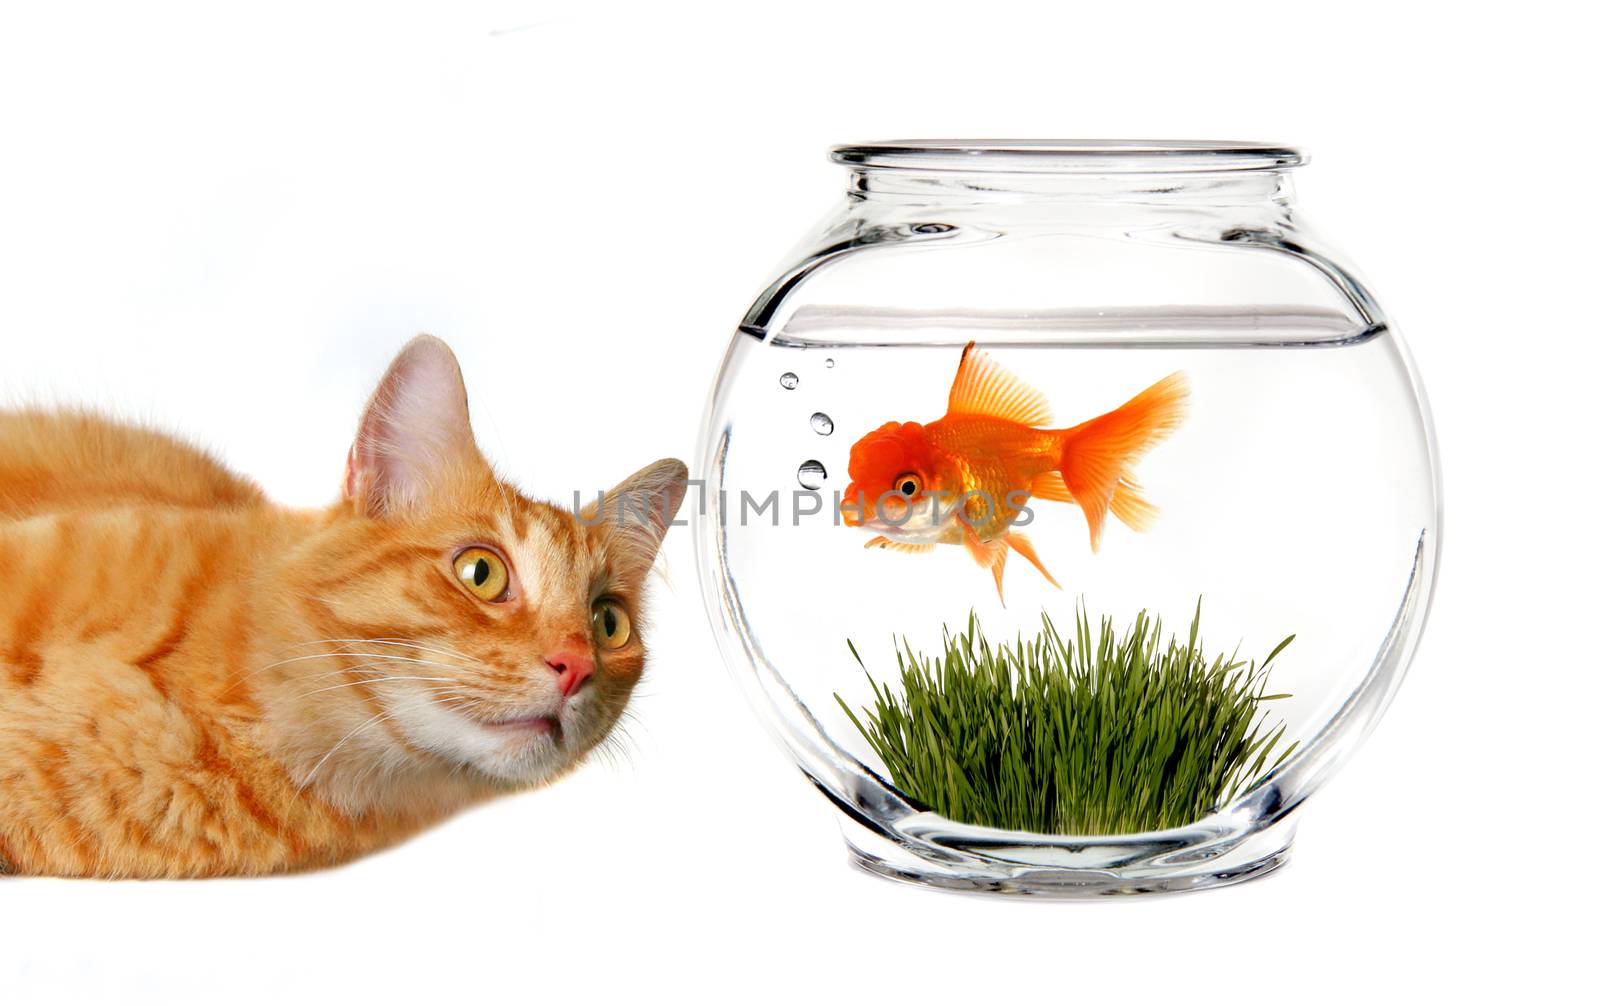 Orange Tabby Cat Mischievously Watching a Goldfish in a Bowl